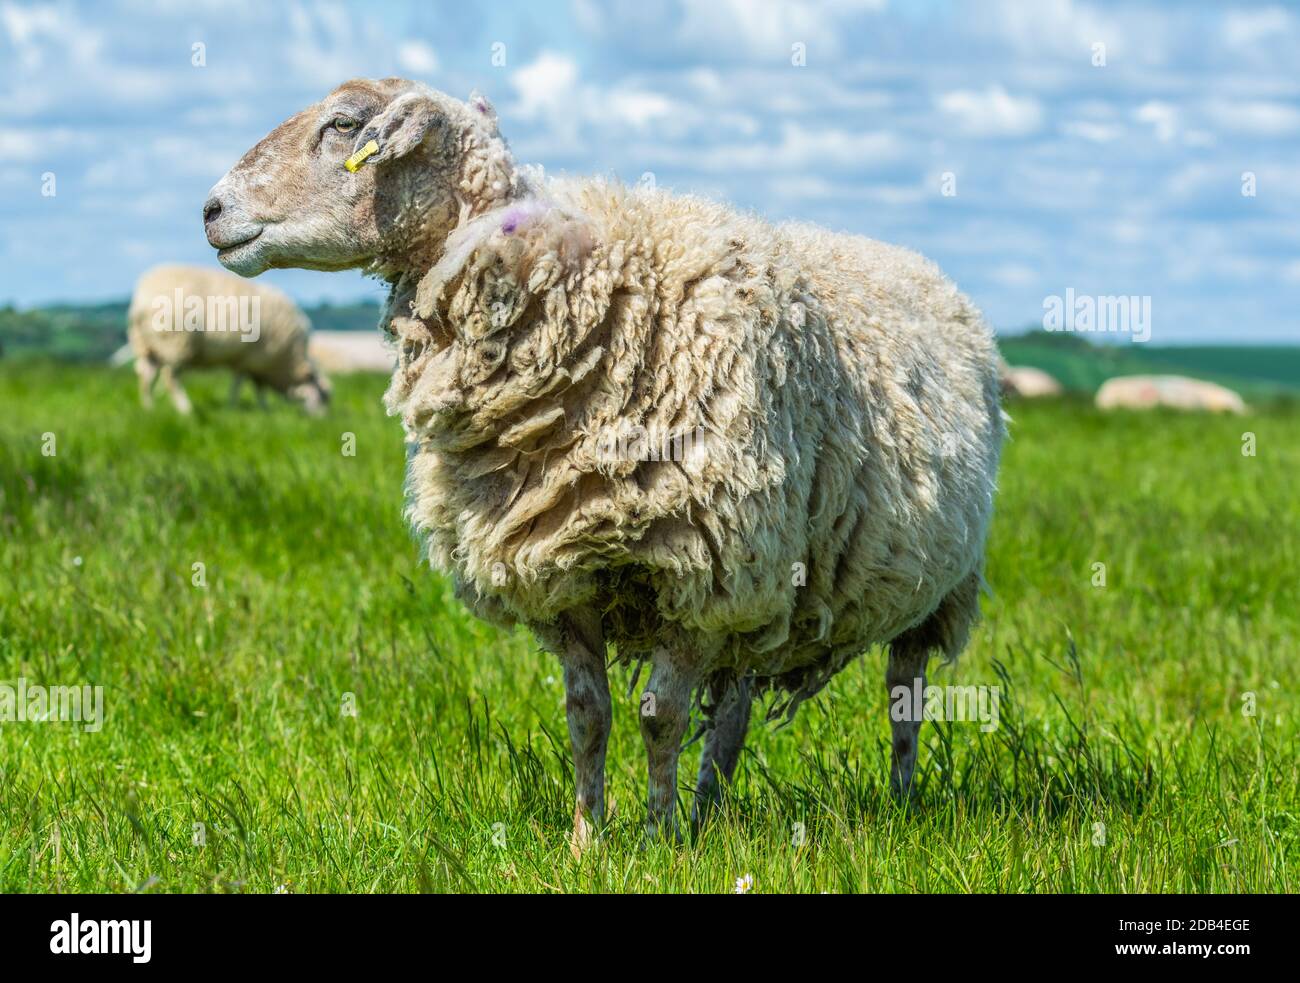 A very woolly white sheep (Ovis Aries) standing in a field on the South Downs in West Sussex, England, UK. Stock Photo